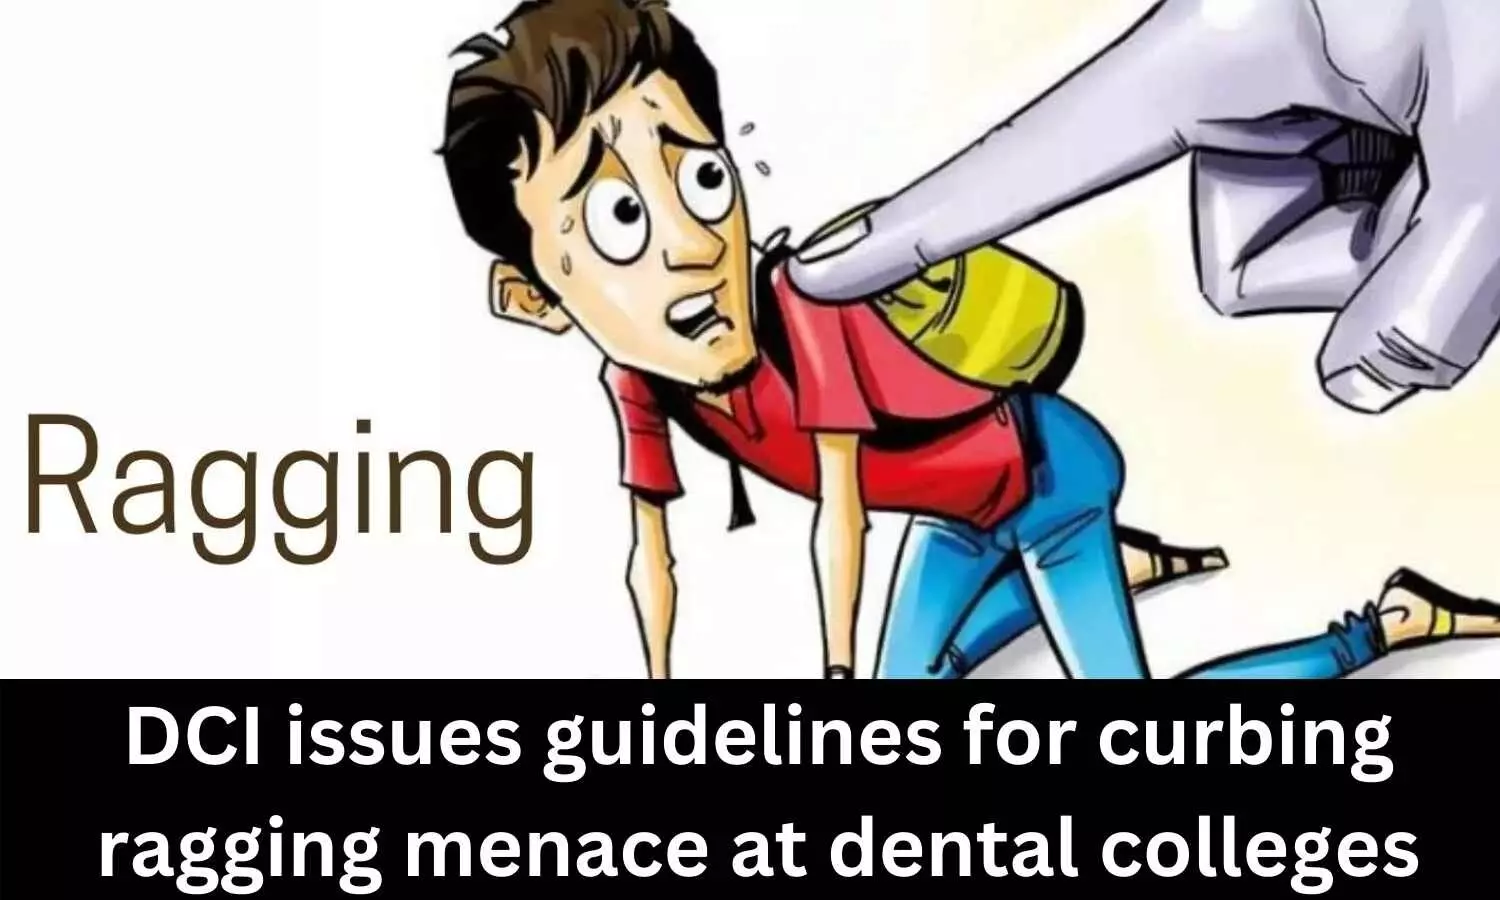 Dental Council of India releases guidelines for curbing ragging menace at dental colleges, details